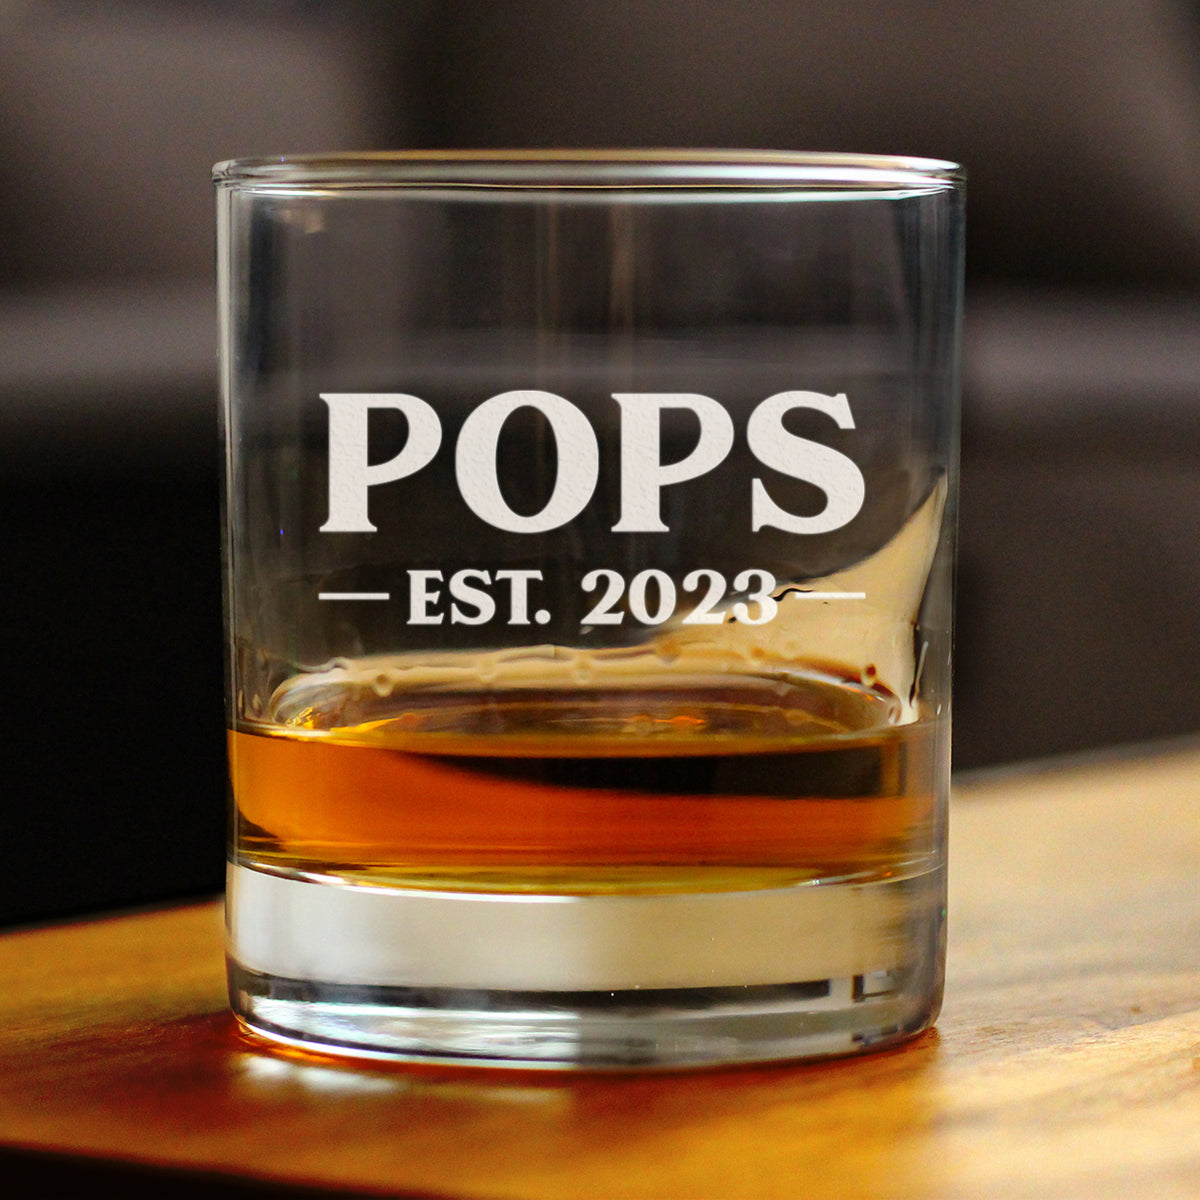 Pops Est. 2023 - Bold - 10 oz Rocks Glass or Old Fashioned Glass, Etched Sayings, Cute and Fun Reveal Gift for Grandparents